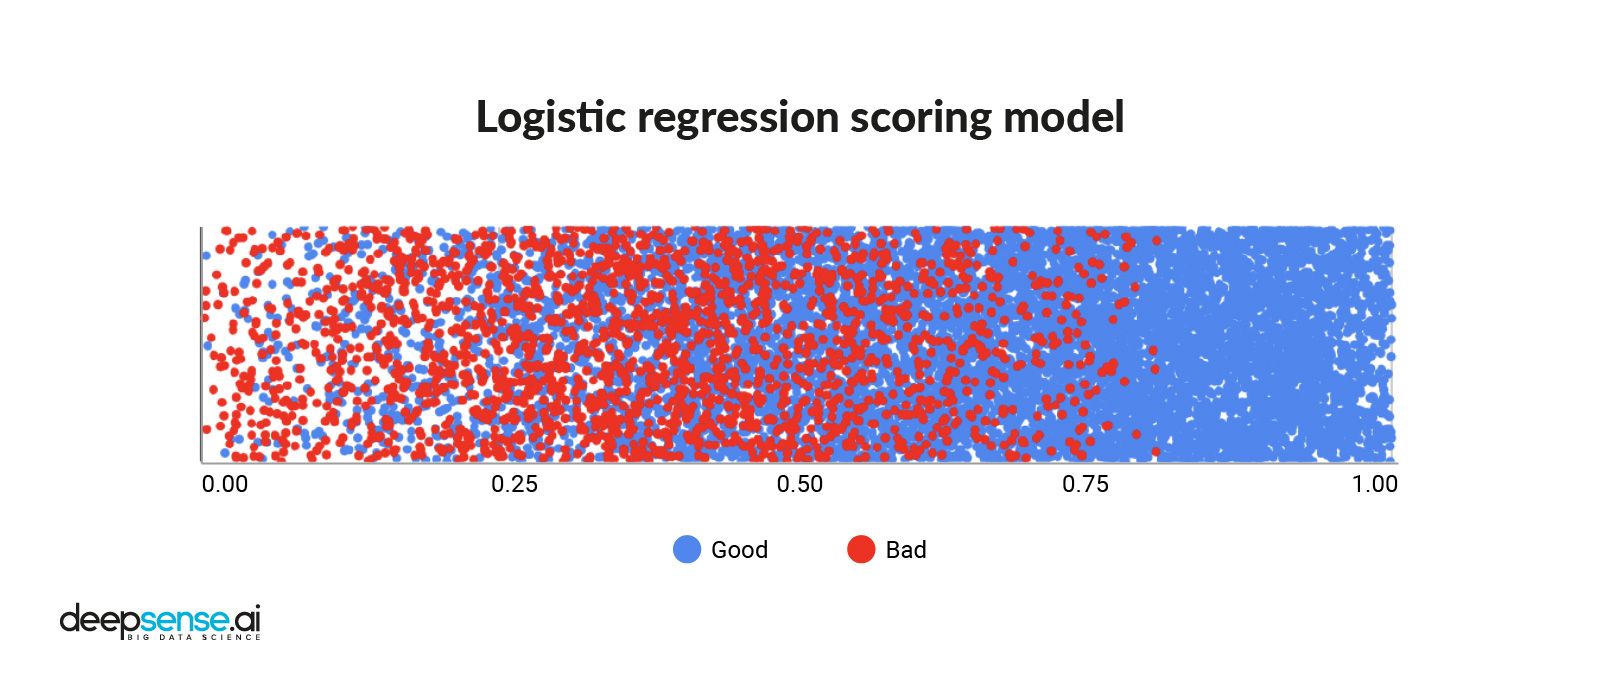 Credit scoring from a logistic regression model